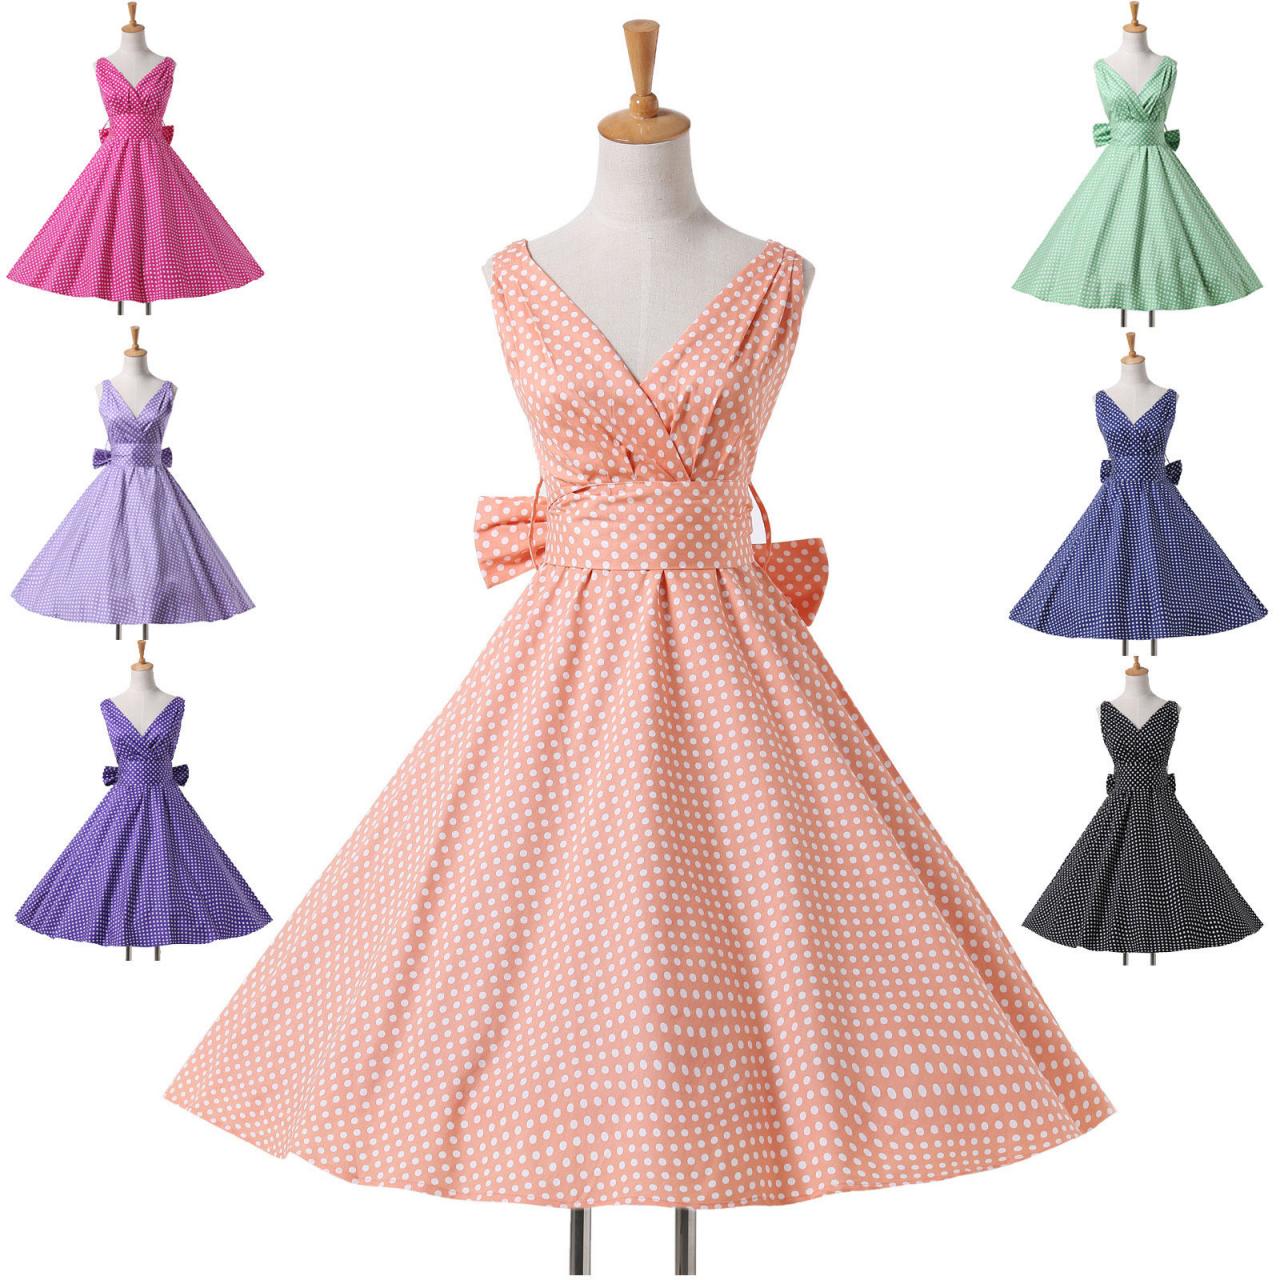 VINTAGE MASQUERADE Clothing Party Evening 50s Rockabilly Cocktail Prom ...